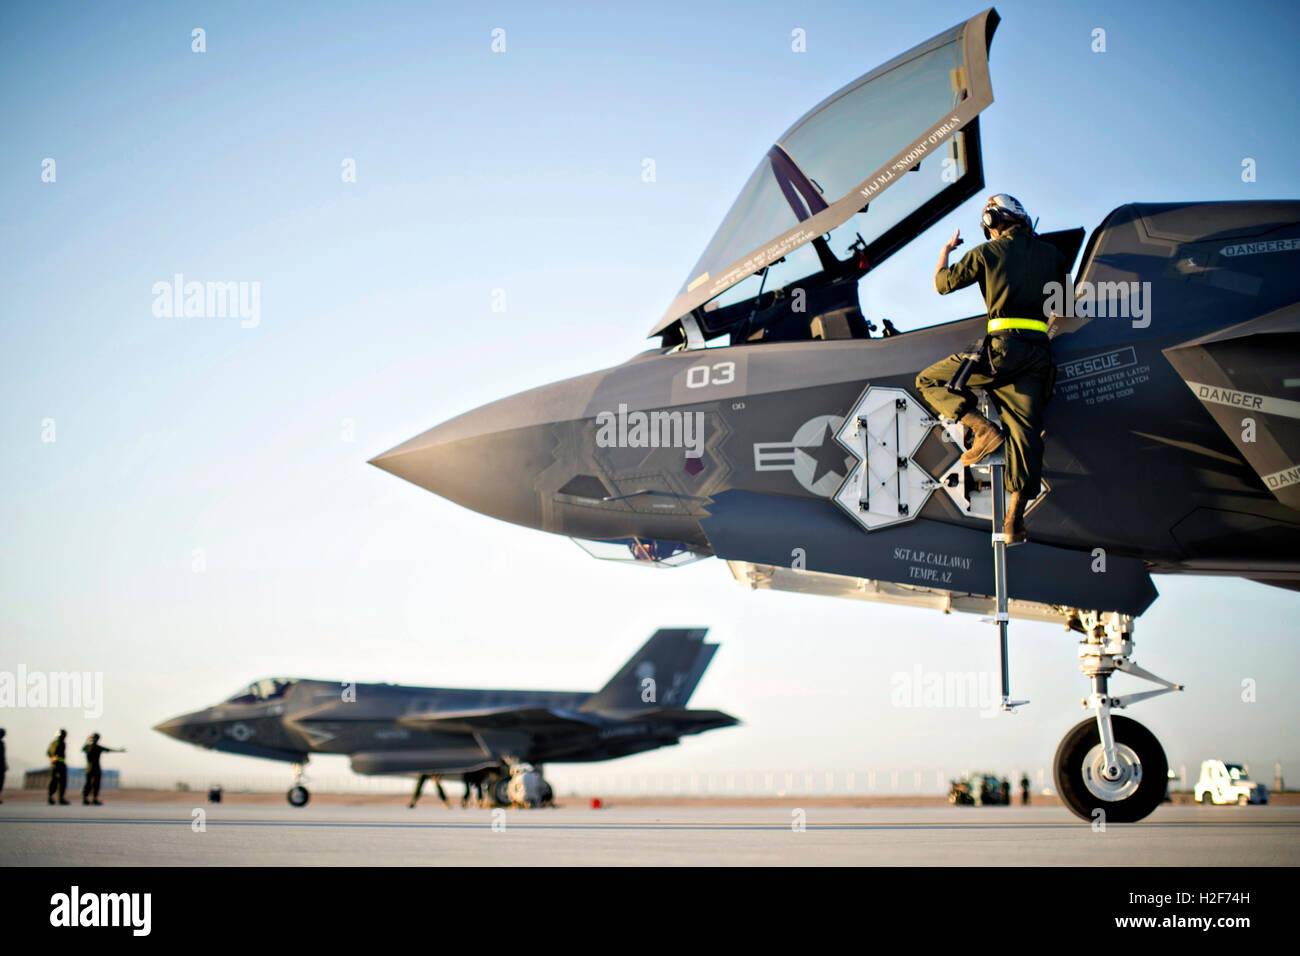 U.S. Marines ground crews prepare F-35B stealth fighter aircraft during the WTI 1-17 training event at the Marine Corps Air Station September 22, 2016 in Yuma, Arizona. Stock Photo